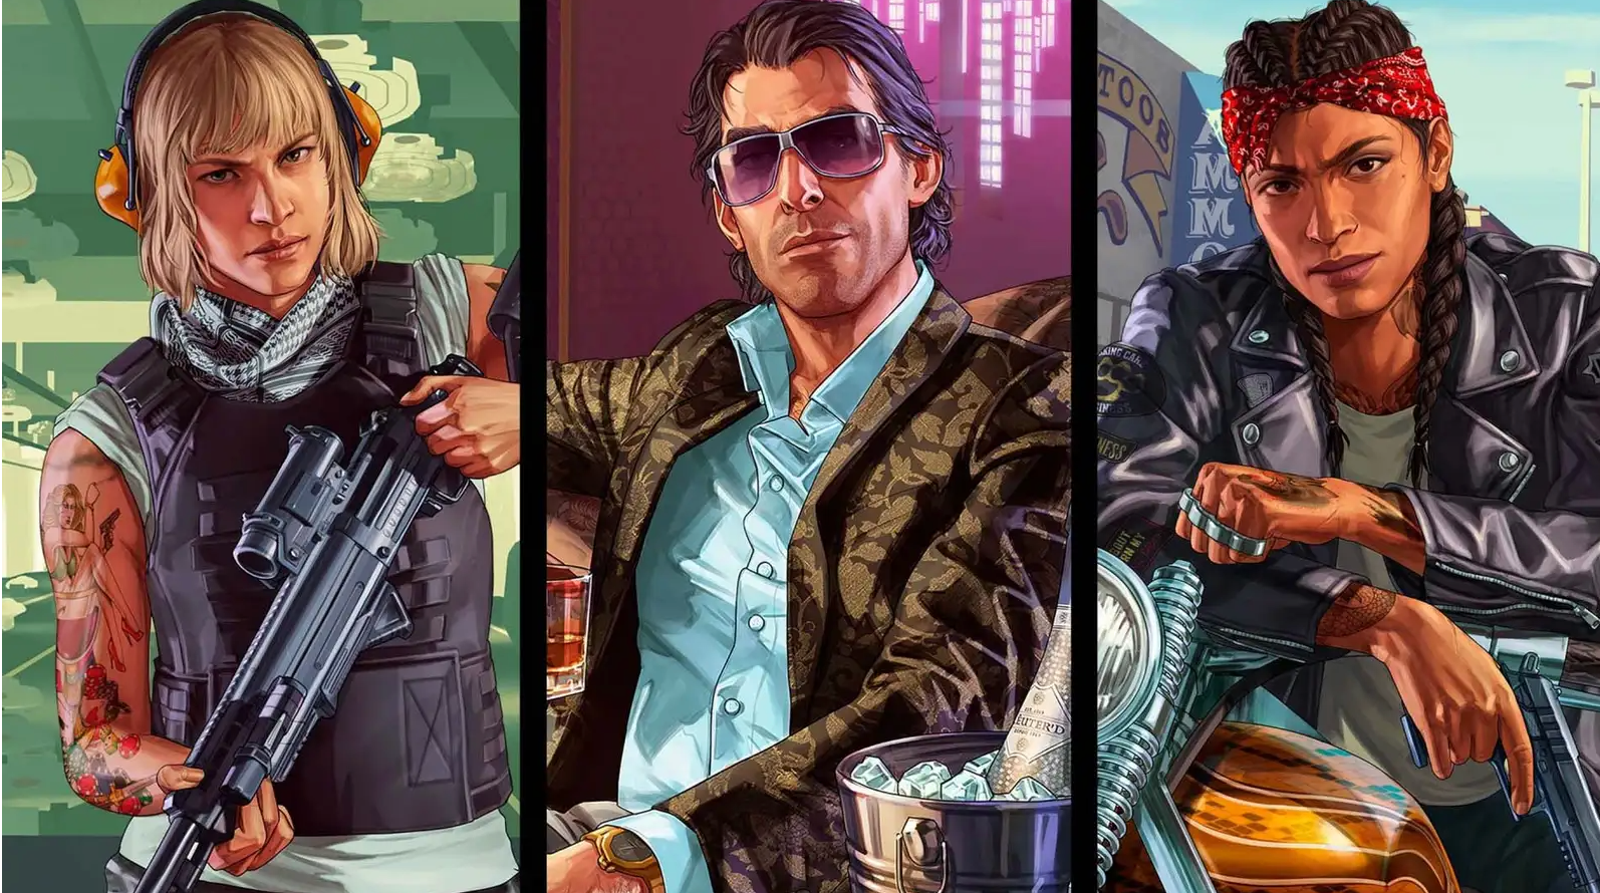 GTA VI Exposed in One of The Largest Video Game Leaks Ever